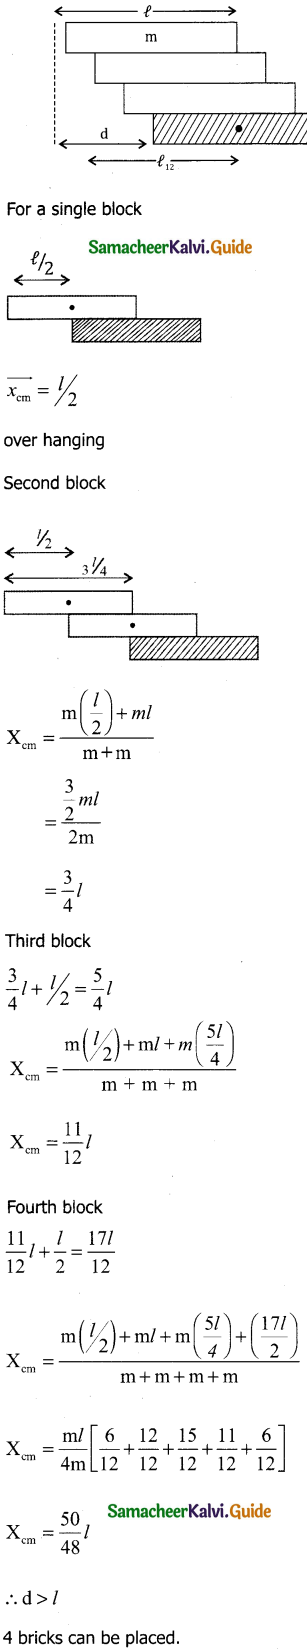 Samacheer Kalvi 11th Physics Guide Chapter 5 Motion of System of Particles and Rigid Bodies 40